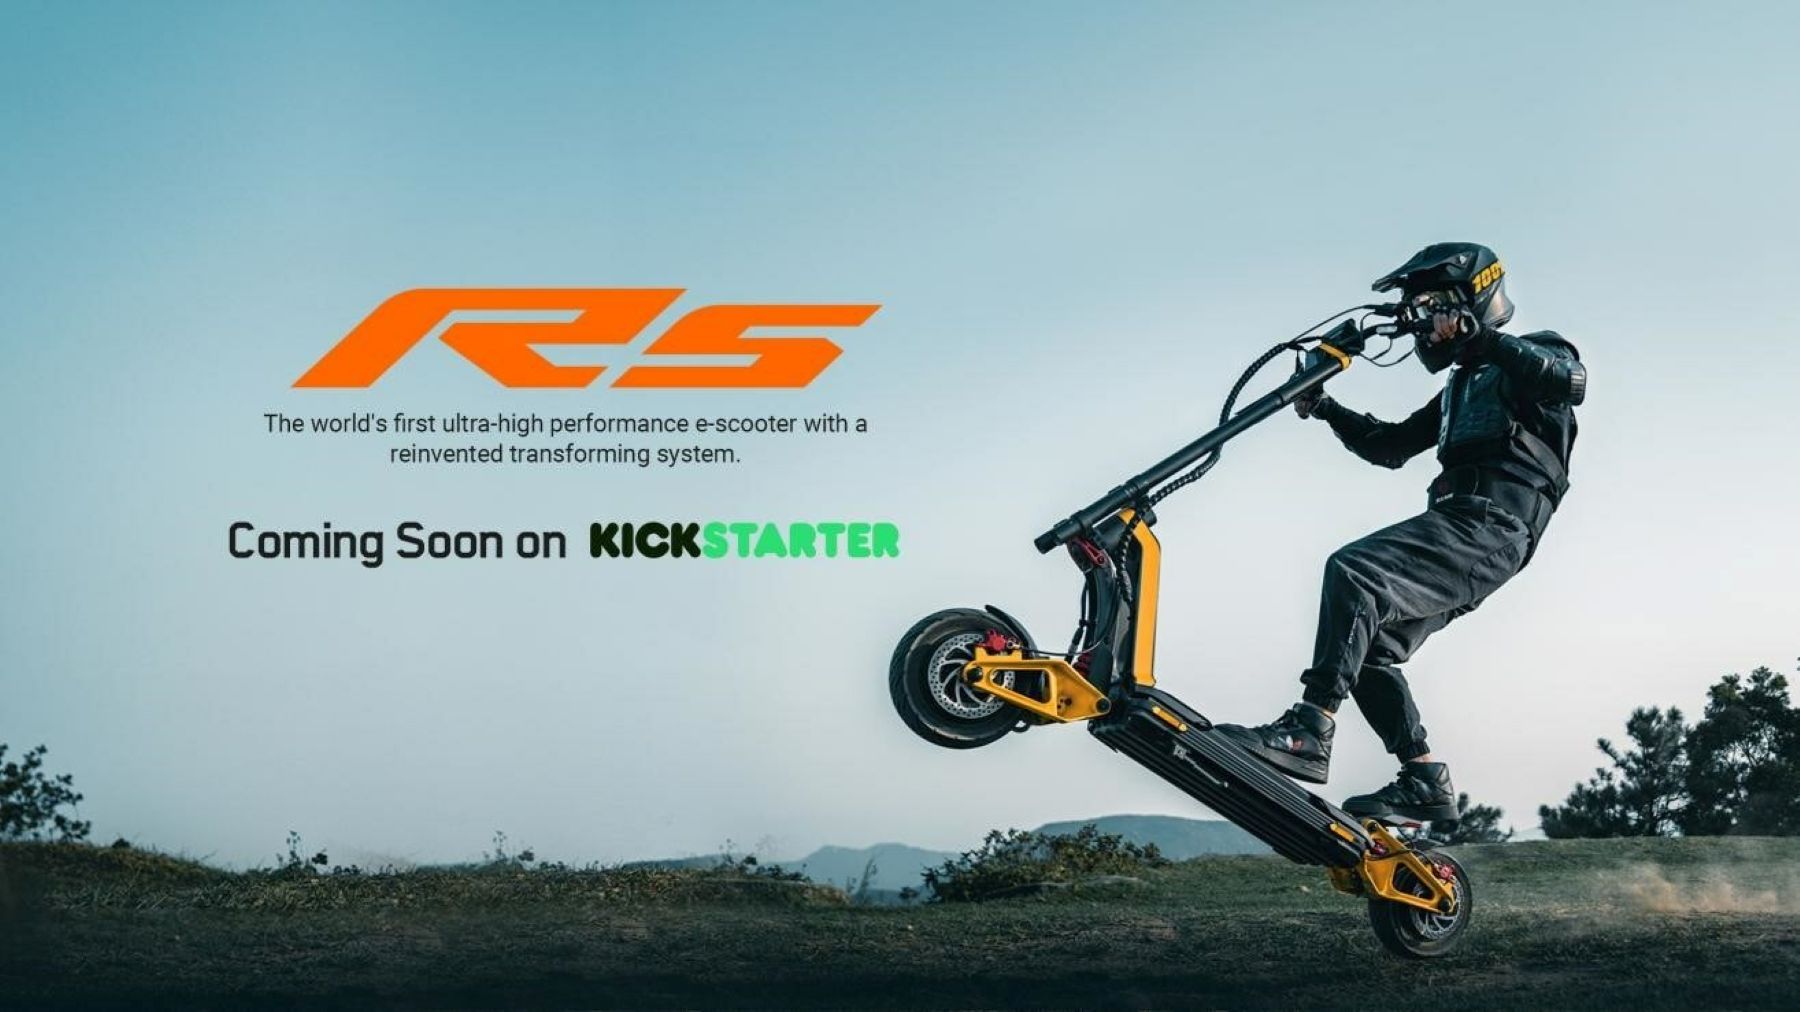 The Ultra-high Performance E-scooter with the World’s 1st Transforming System Hits Kickstarter Now